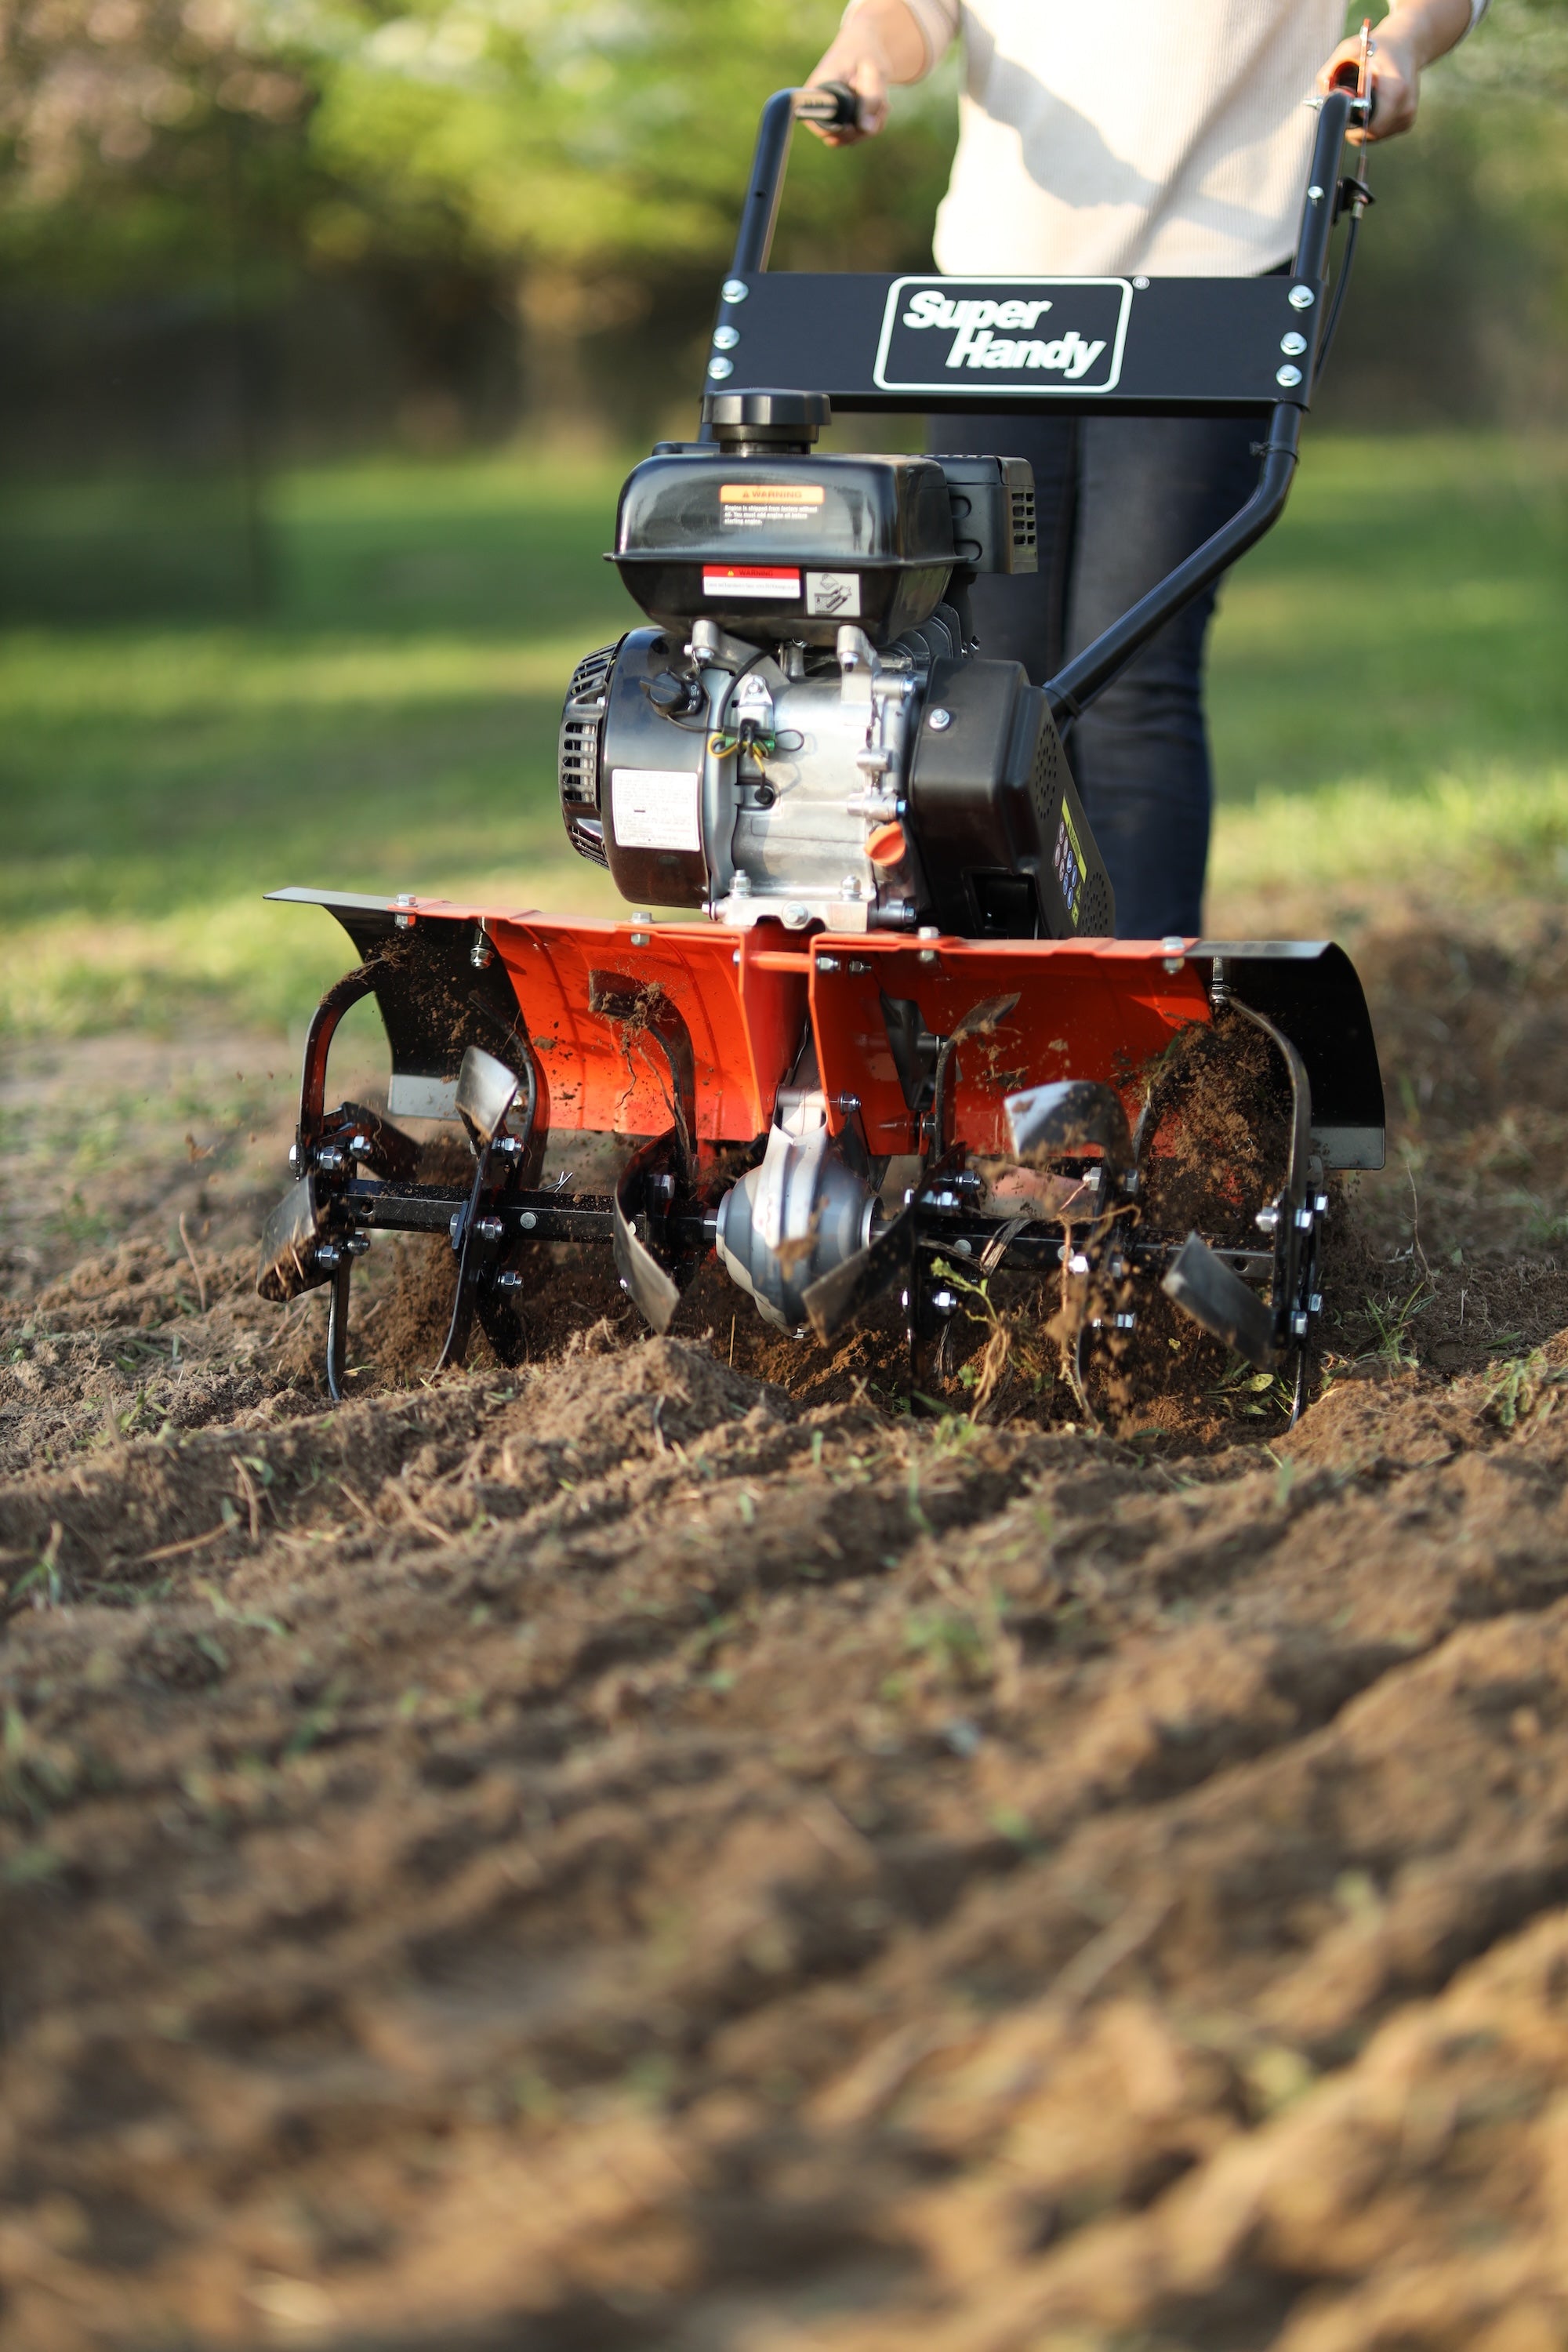 Buyers Guide: Garden Tillers - "Cultivate Your Garden with Confidence"